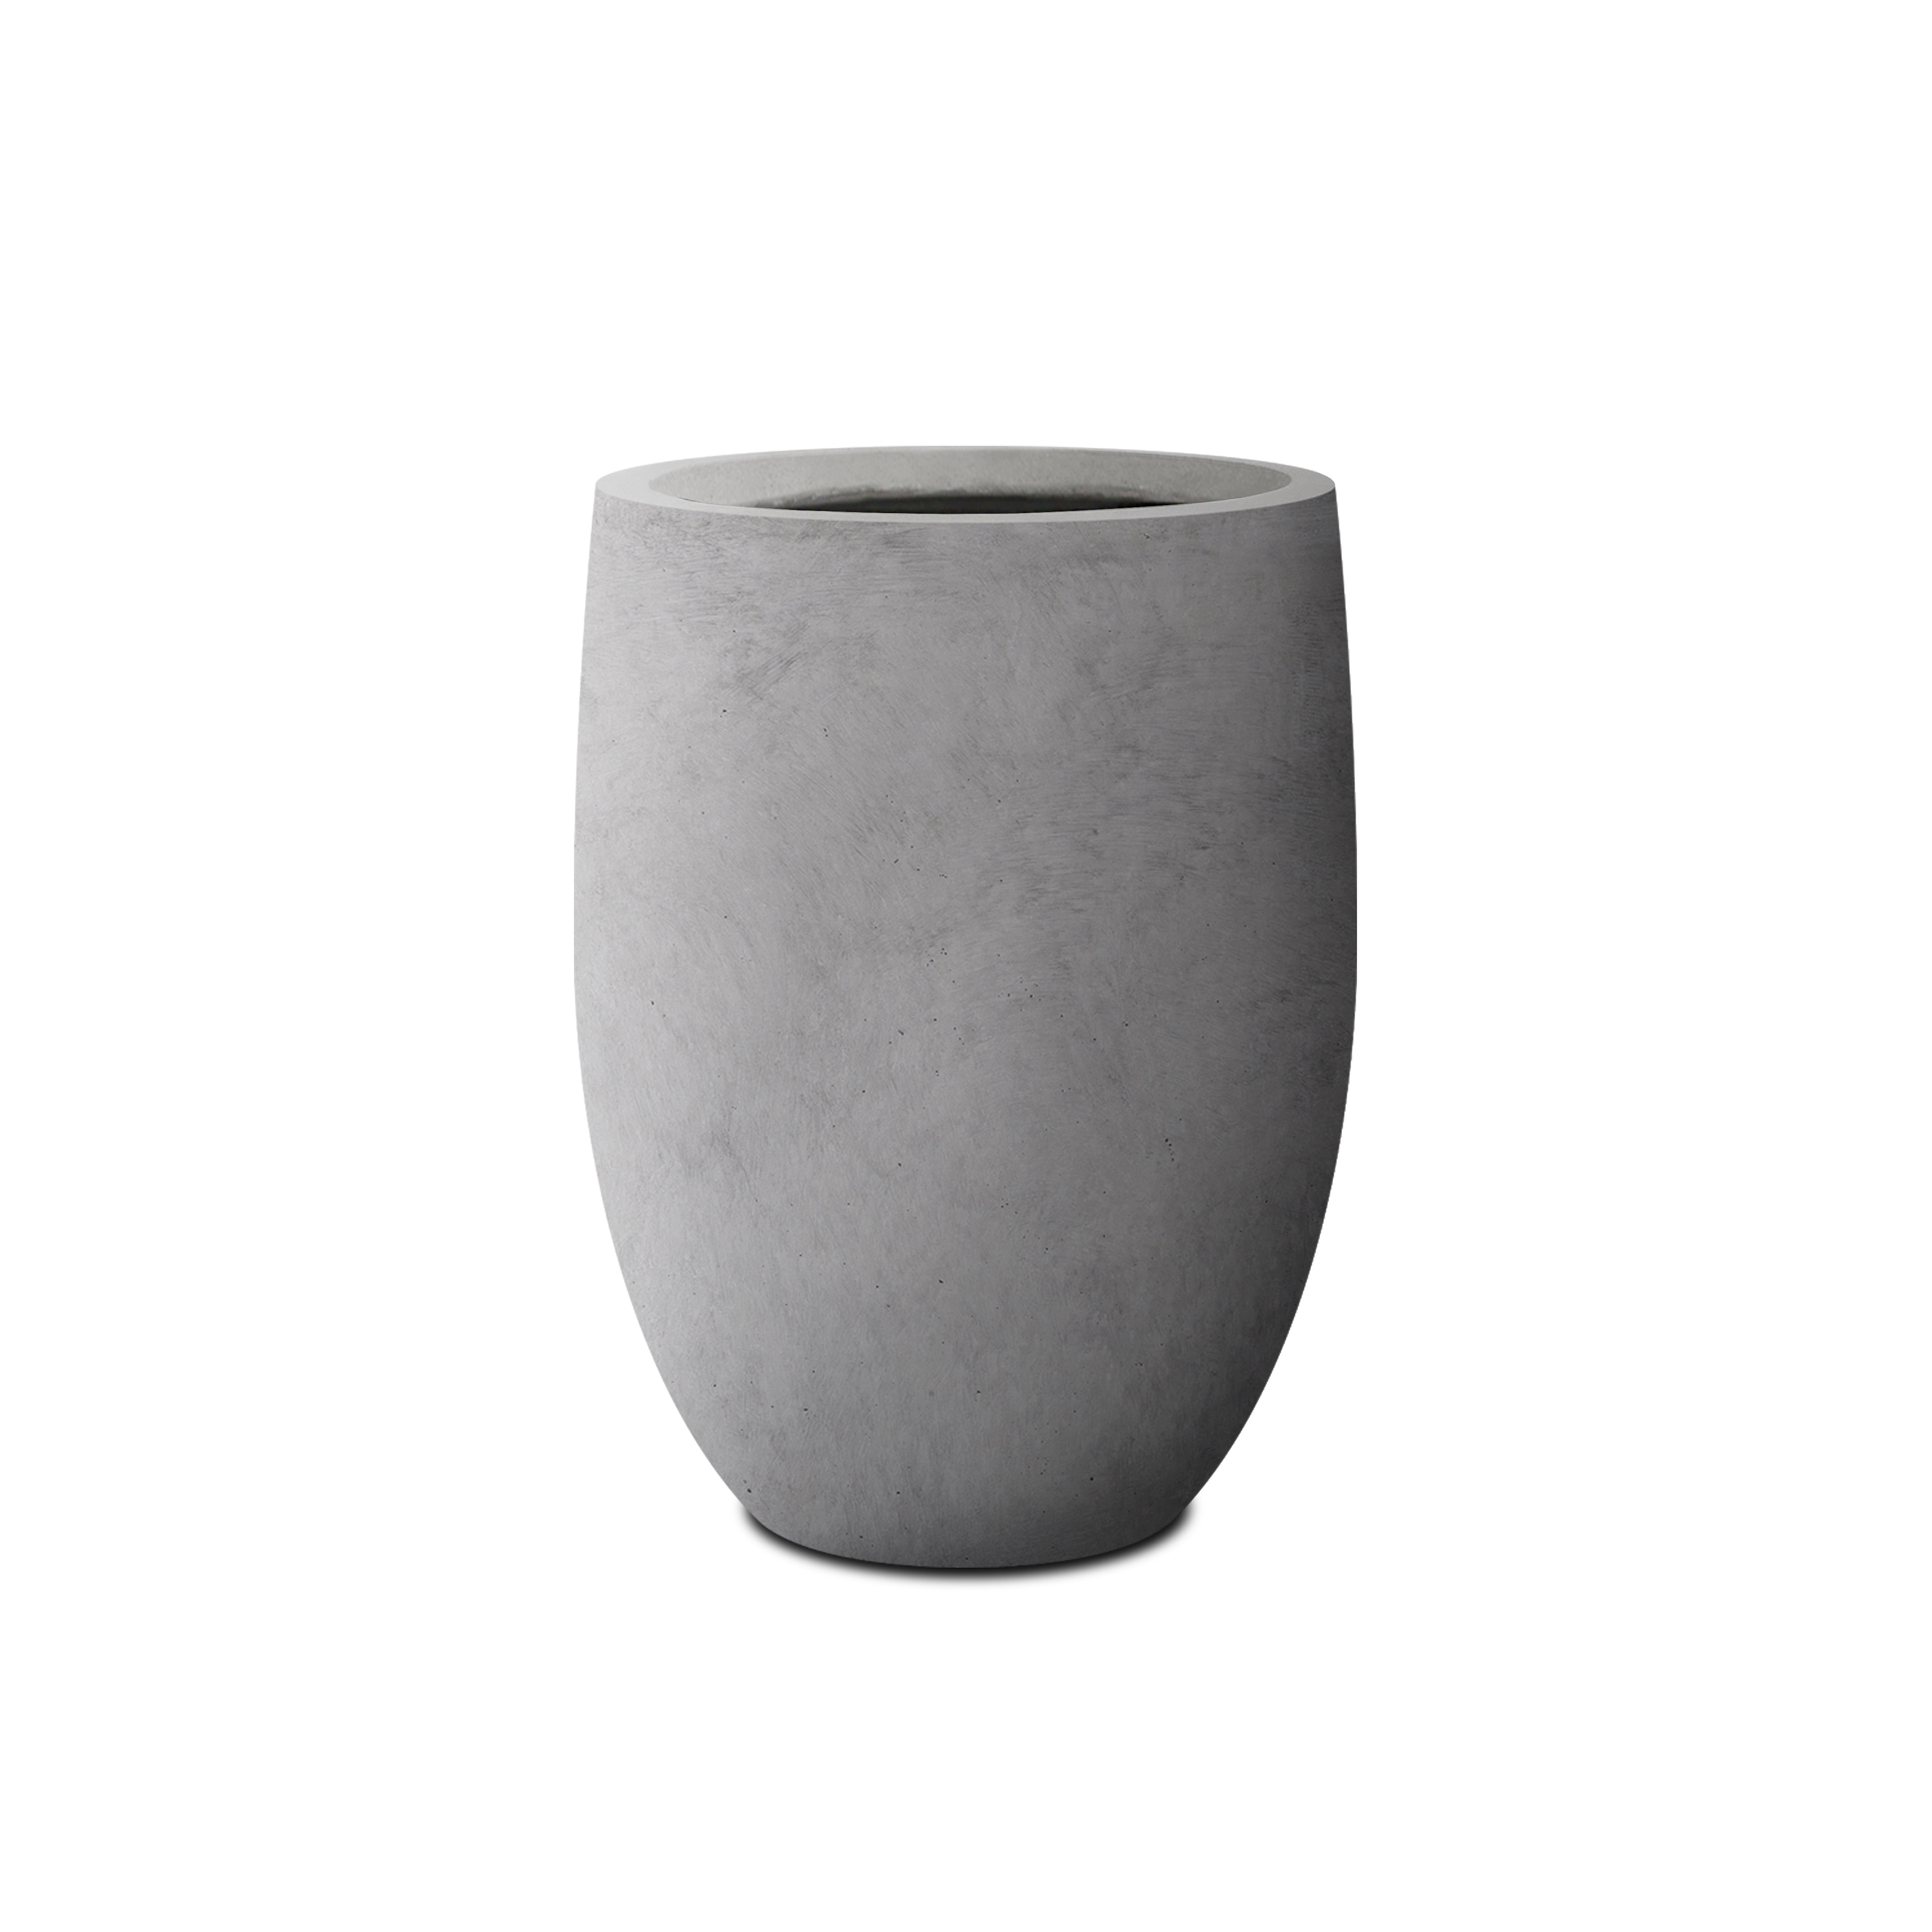 Kante Lightweight Concrete Outdoor Round Tall Planter, 21.7 Inch Tall On  Sale Bed Bath  Beyond 30694502